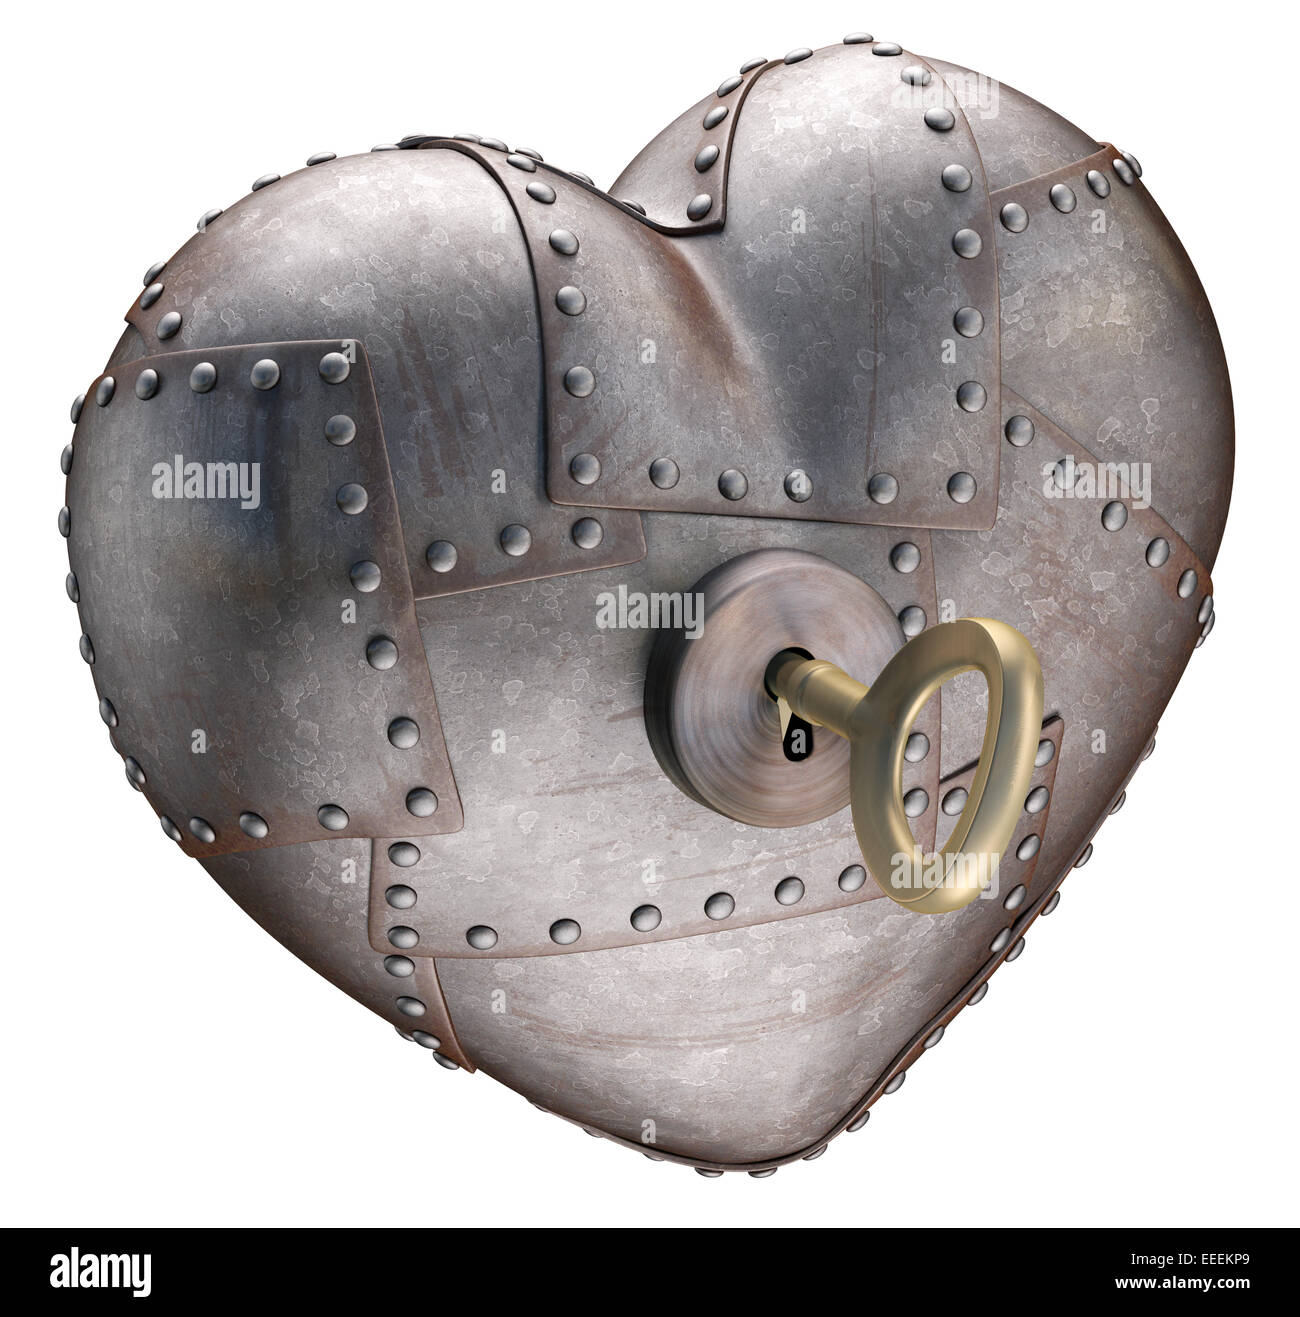 Metal heart being opened by a key. Clipping path included. Stock Photo